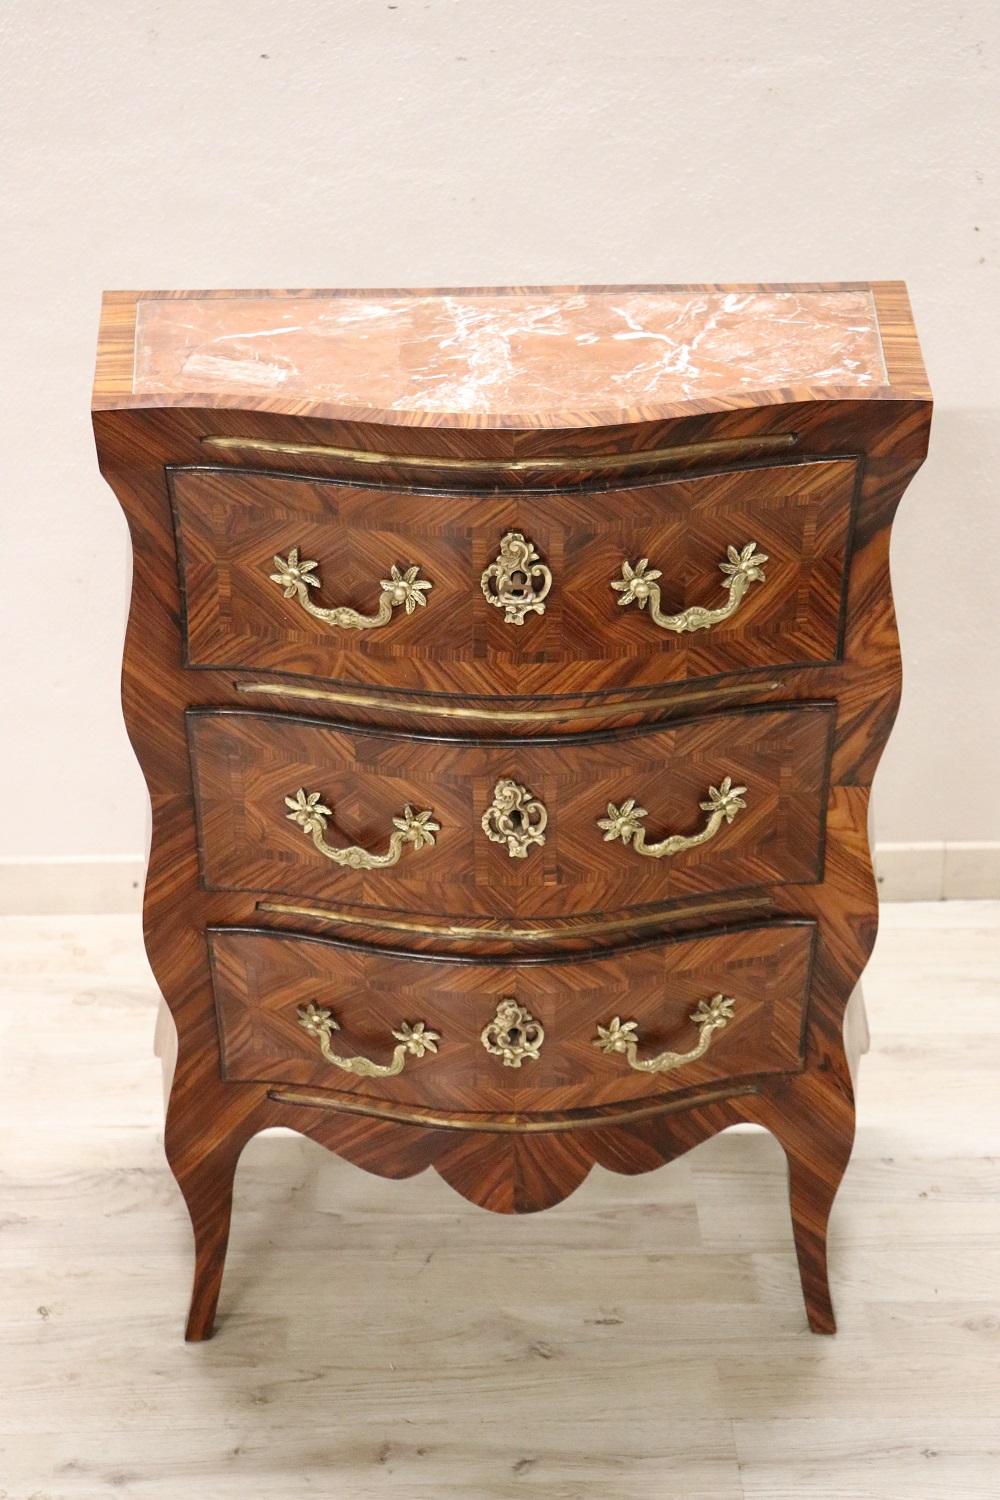 Rare and fine quality erly 20th century Italian Louis XV style antique small chest of drawers. On the front three comfortable drawers. Characterized by a particular wavy line on the front and sides with elegant saber legs. Fully decorated with